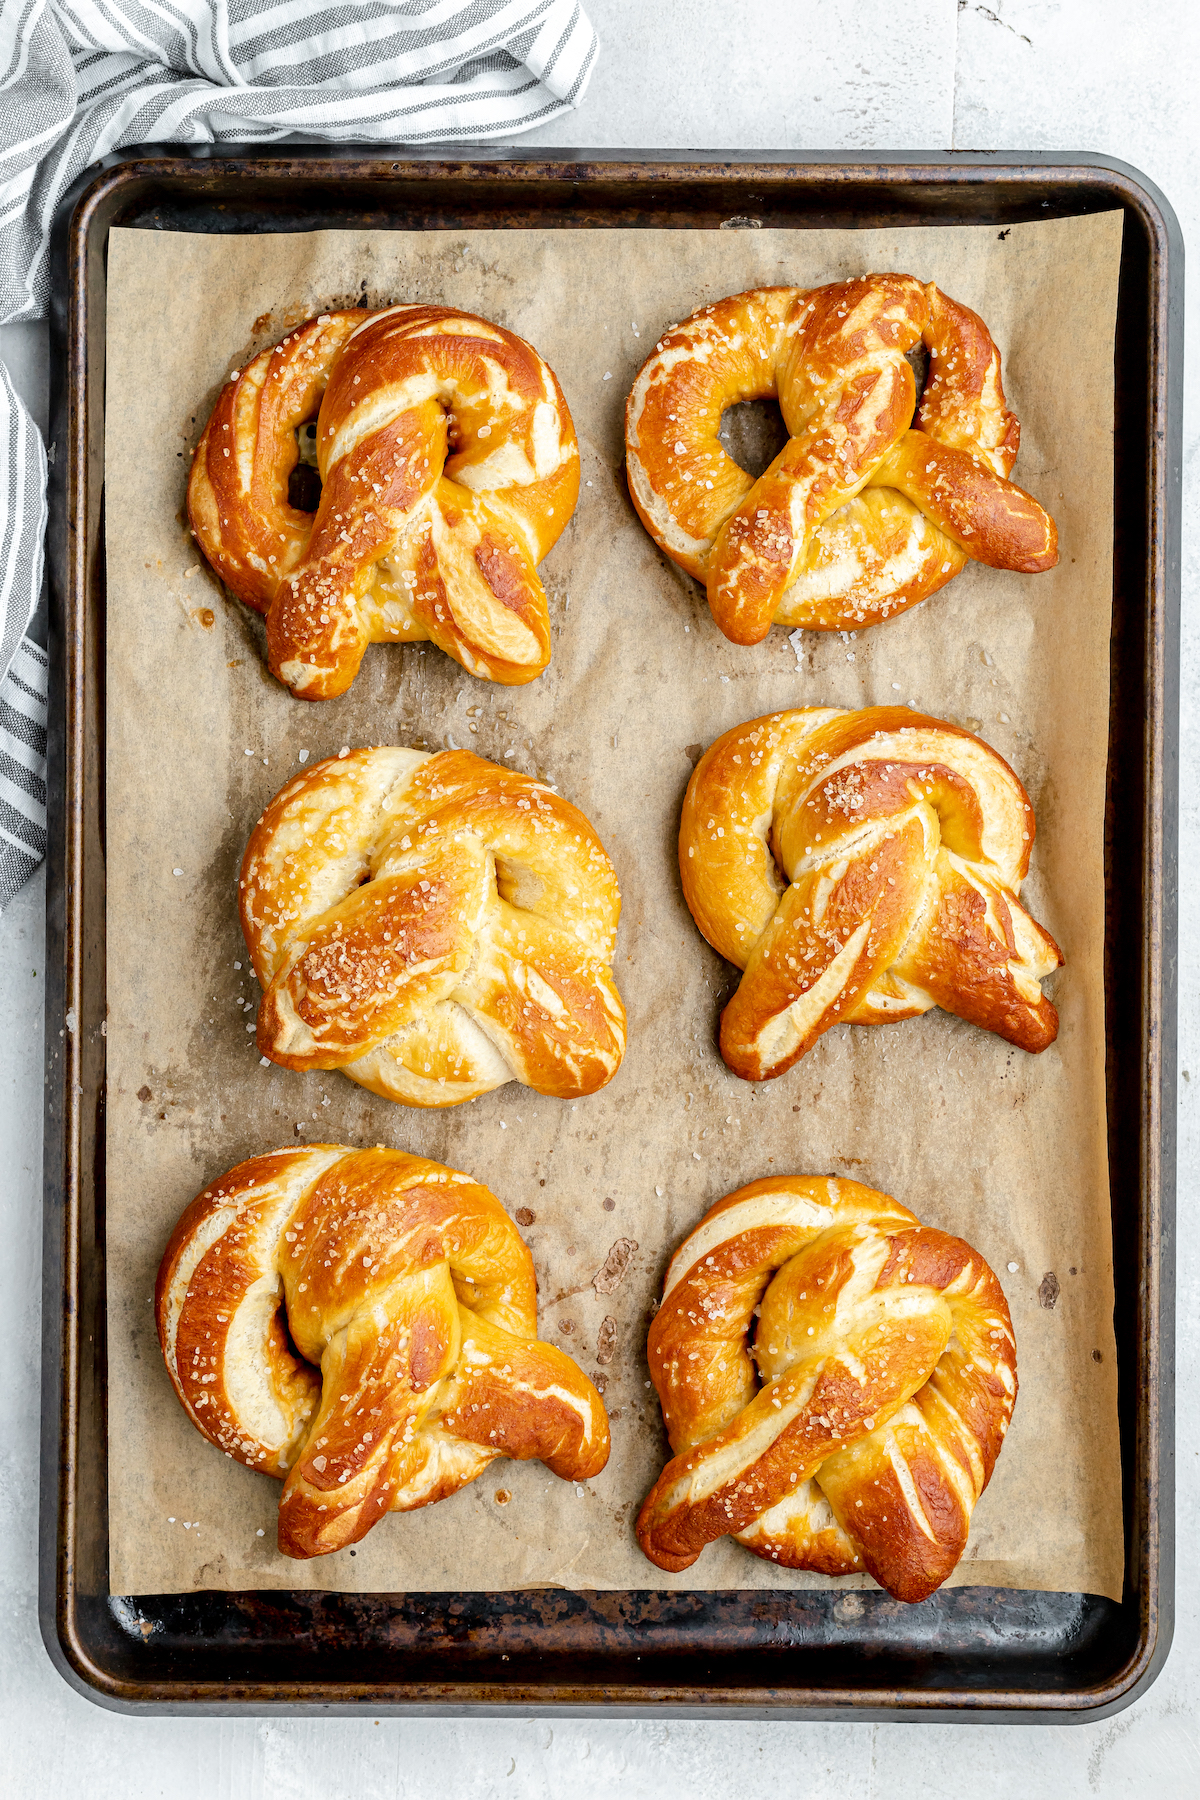 Six baked snacks on a baking sheet.